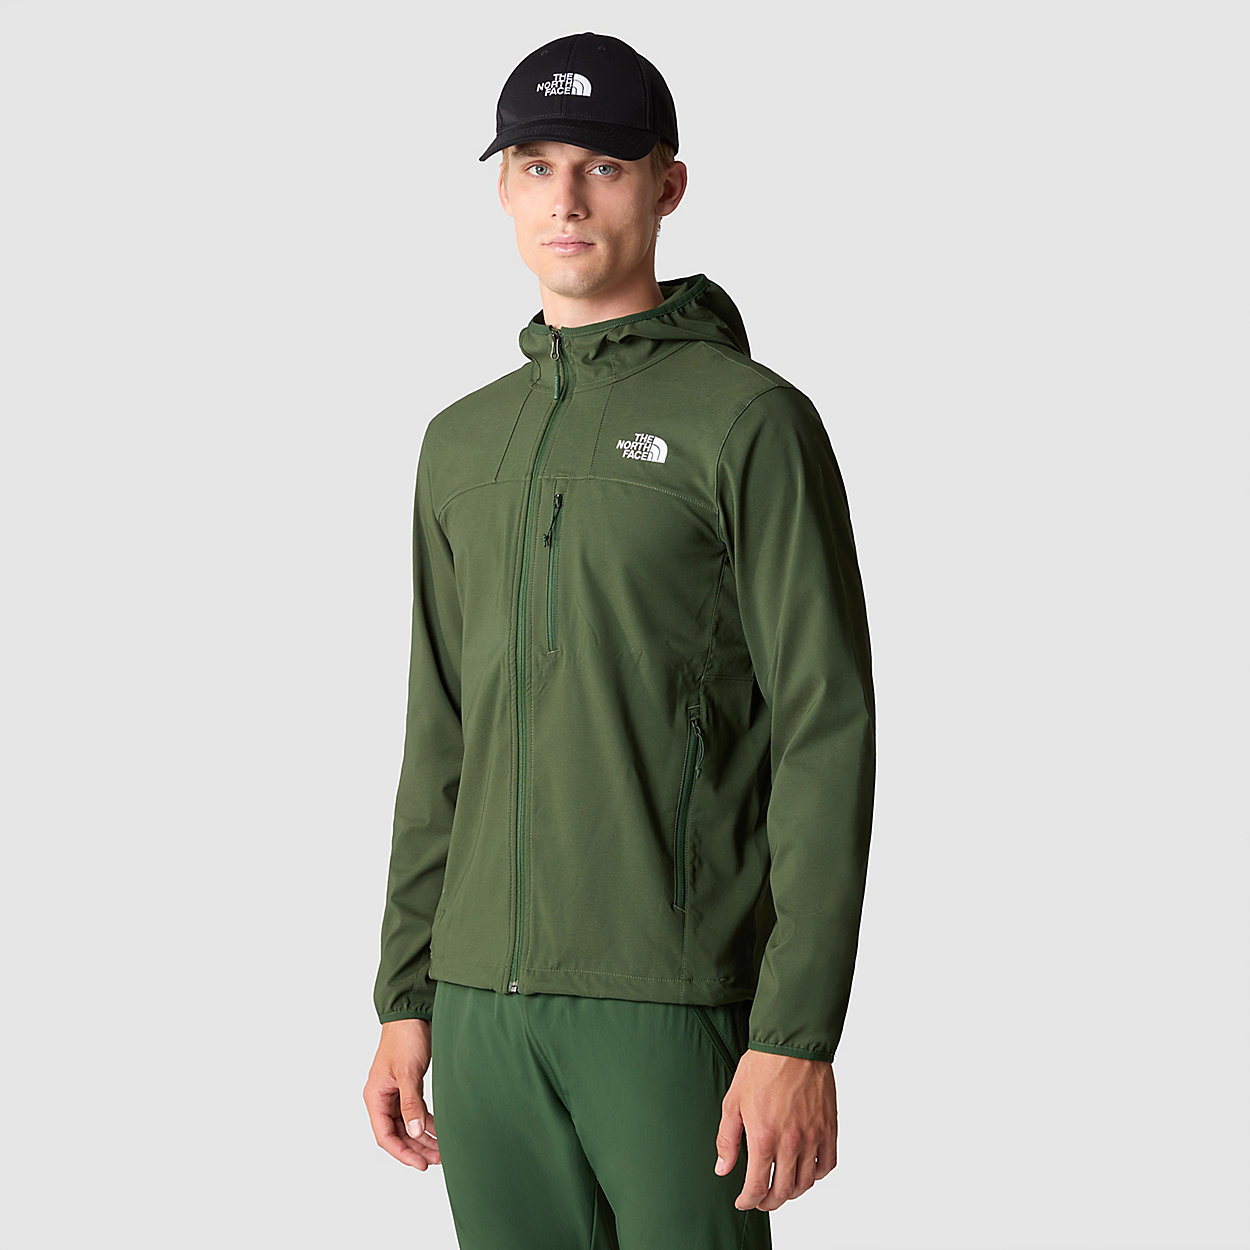 Unlock Wilderness' choice in the Mountain Warehouse Vs North Face comparison, the Nimble Hooded Jacket by The North Face